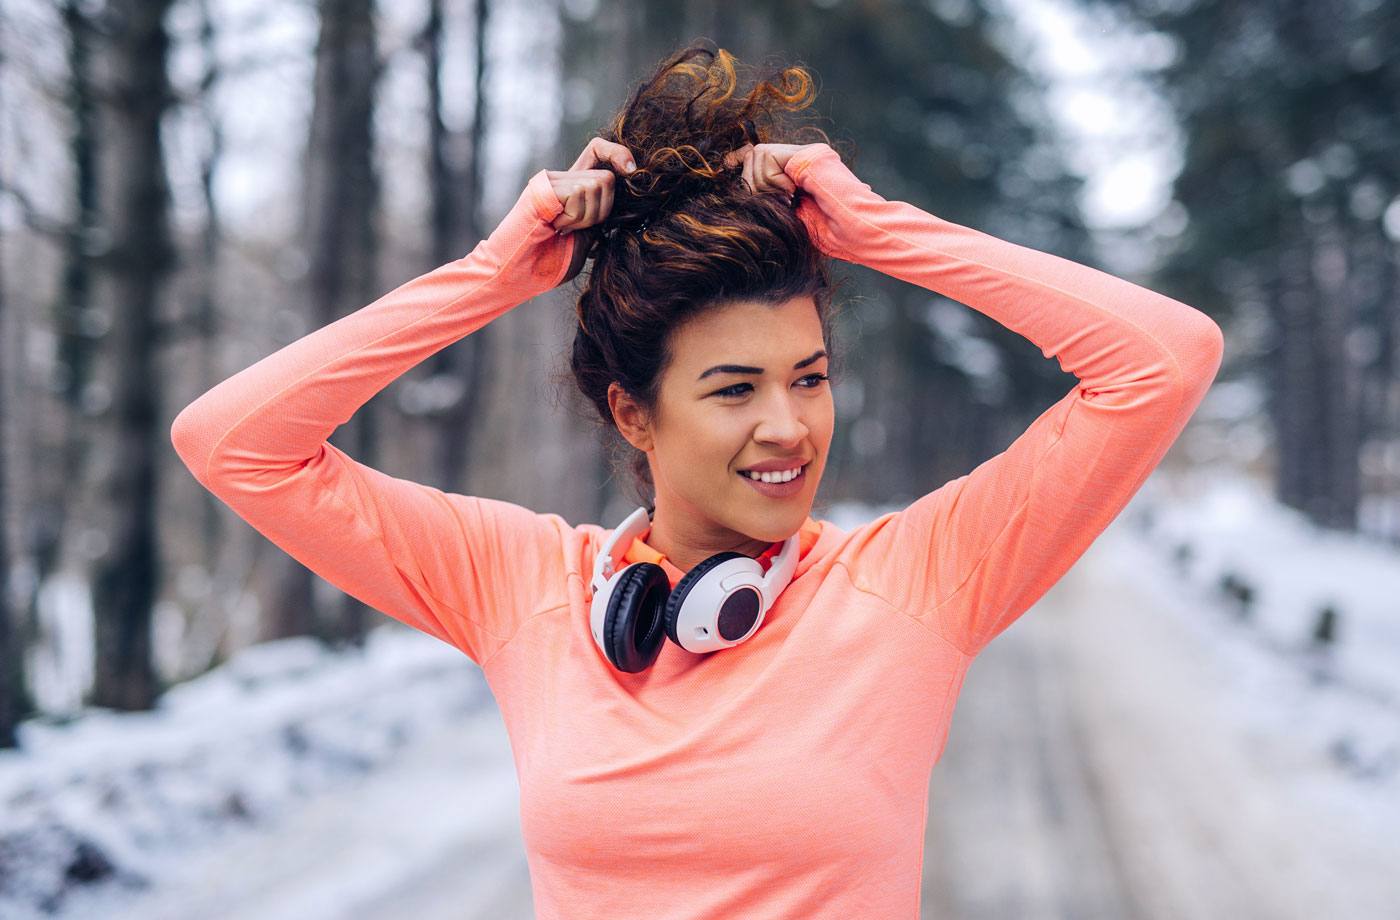 Hit The Gym With These Cute Workout Hairstyles For Short